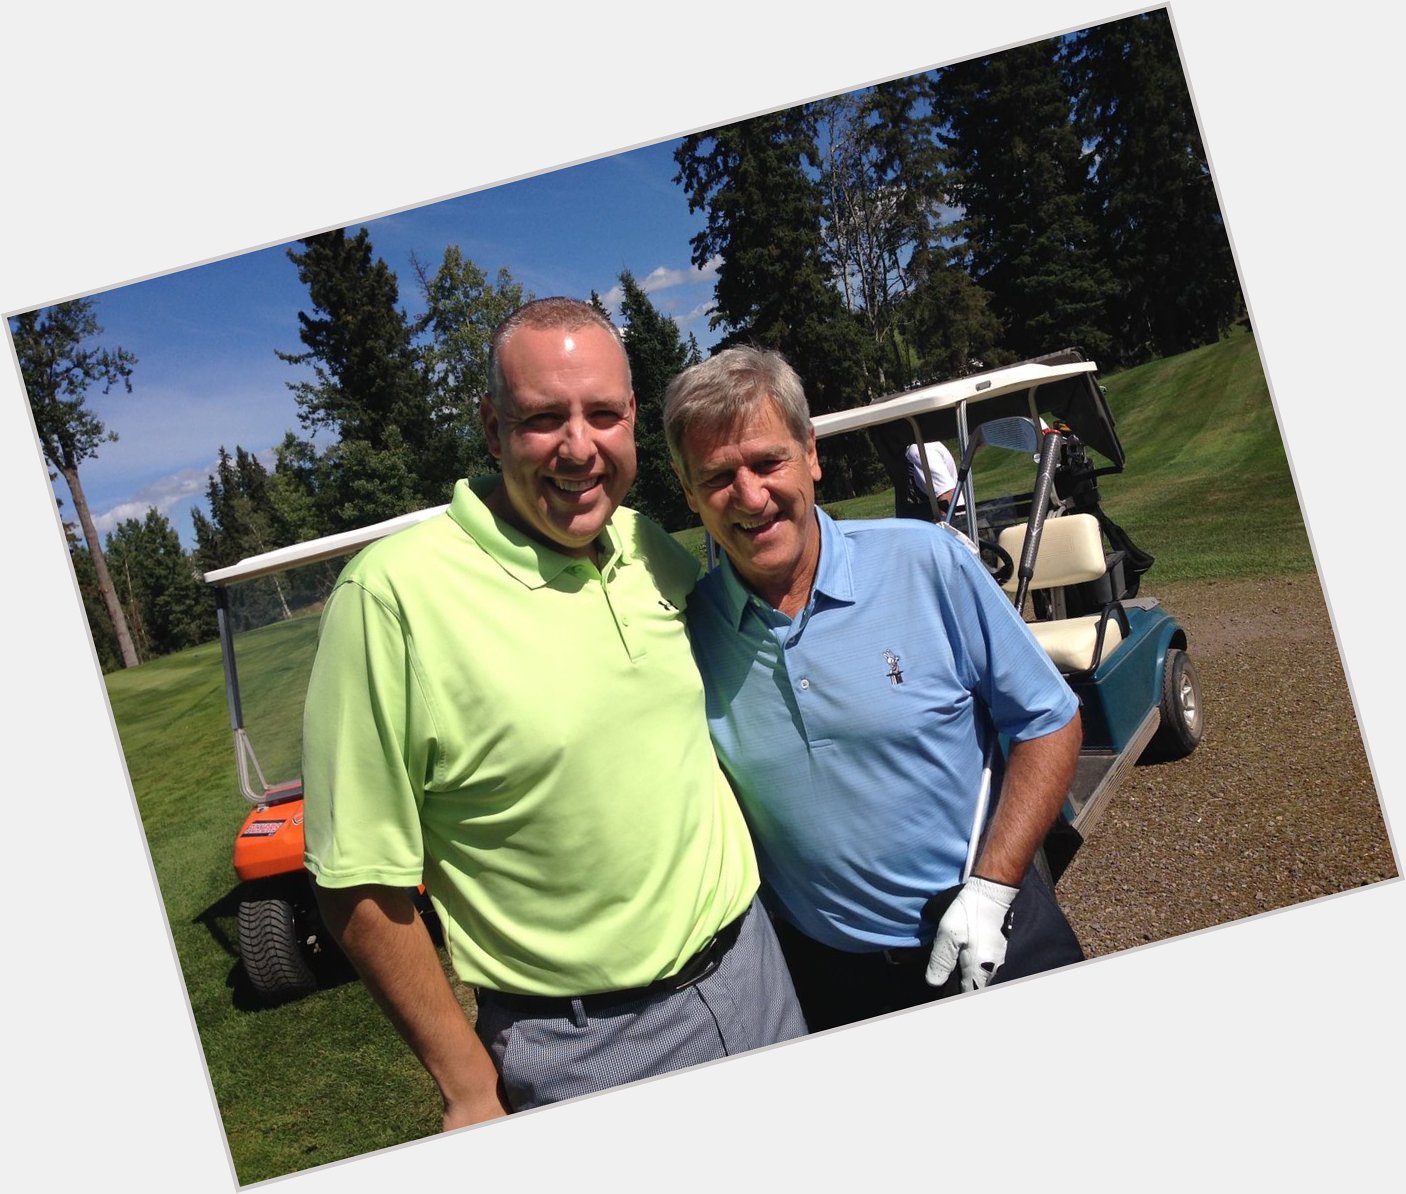 Happy 70th birthday to a truly nice person. The great Bobby Orr. 